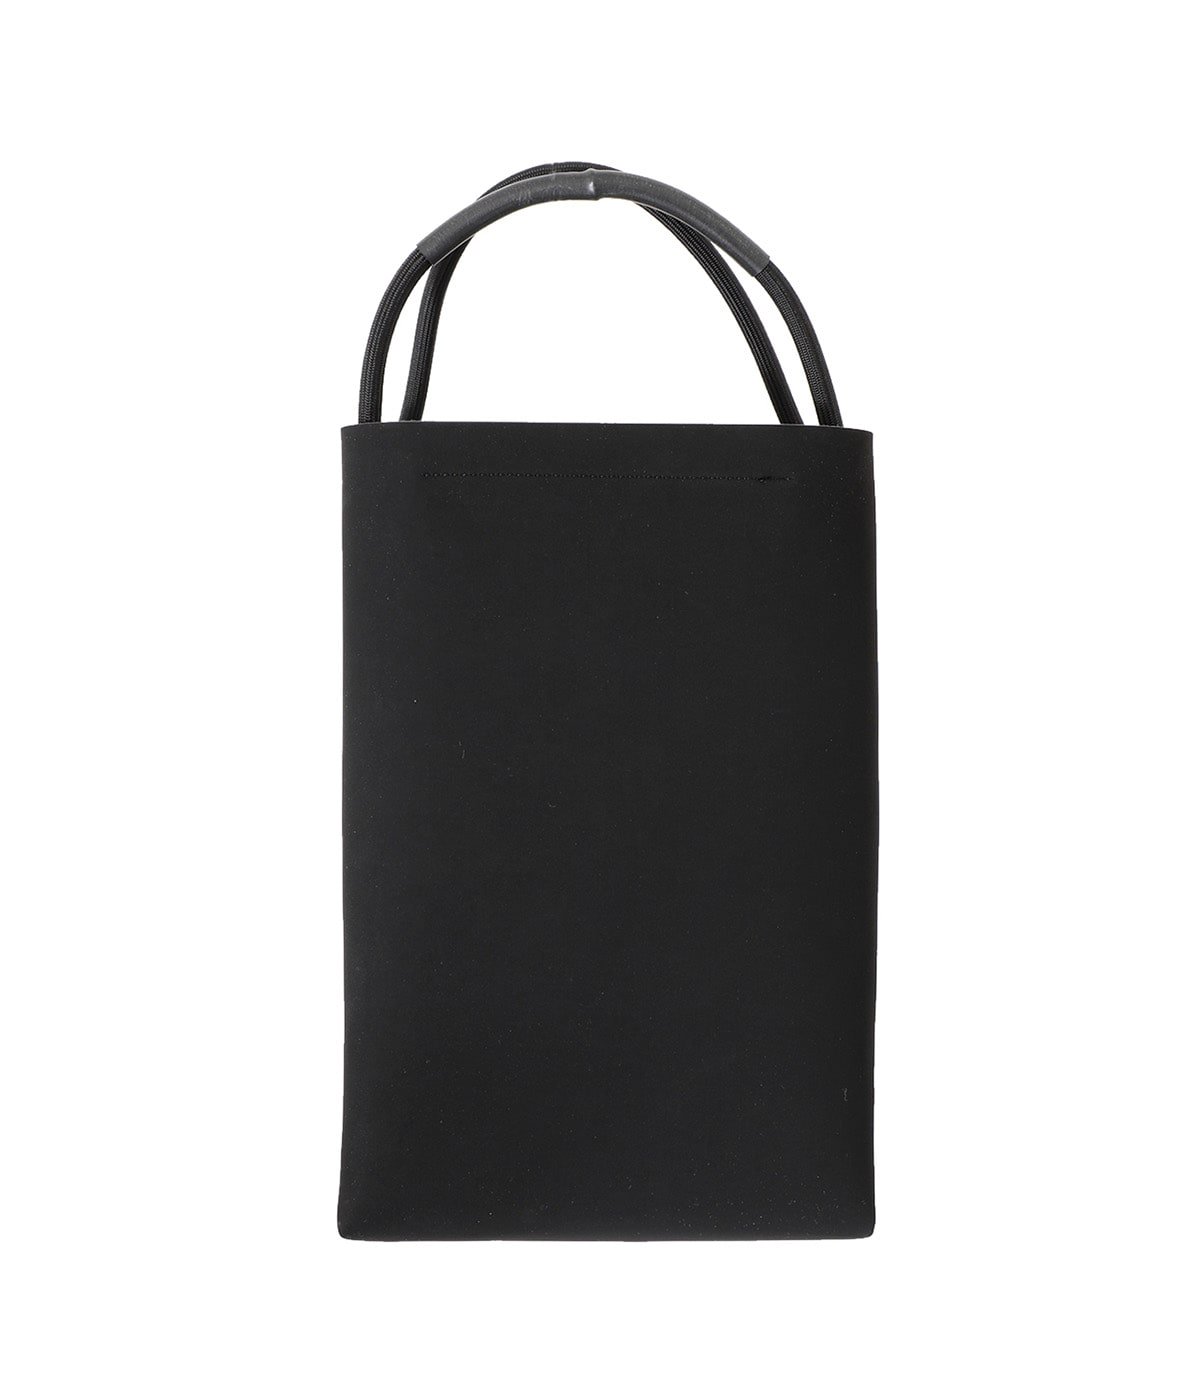 GUM LEATHER TOTE MS | Obvuse(オビューズ) / バッグ トートバッグ 